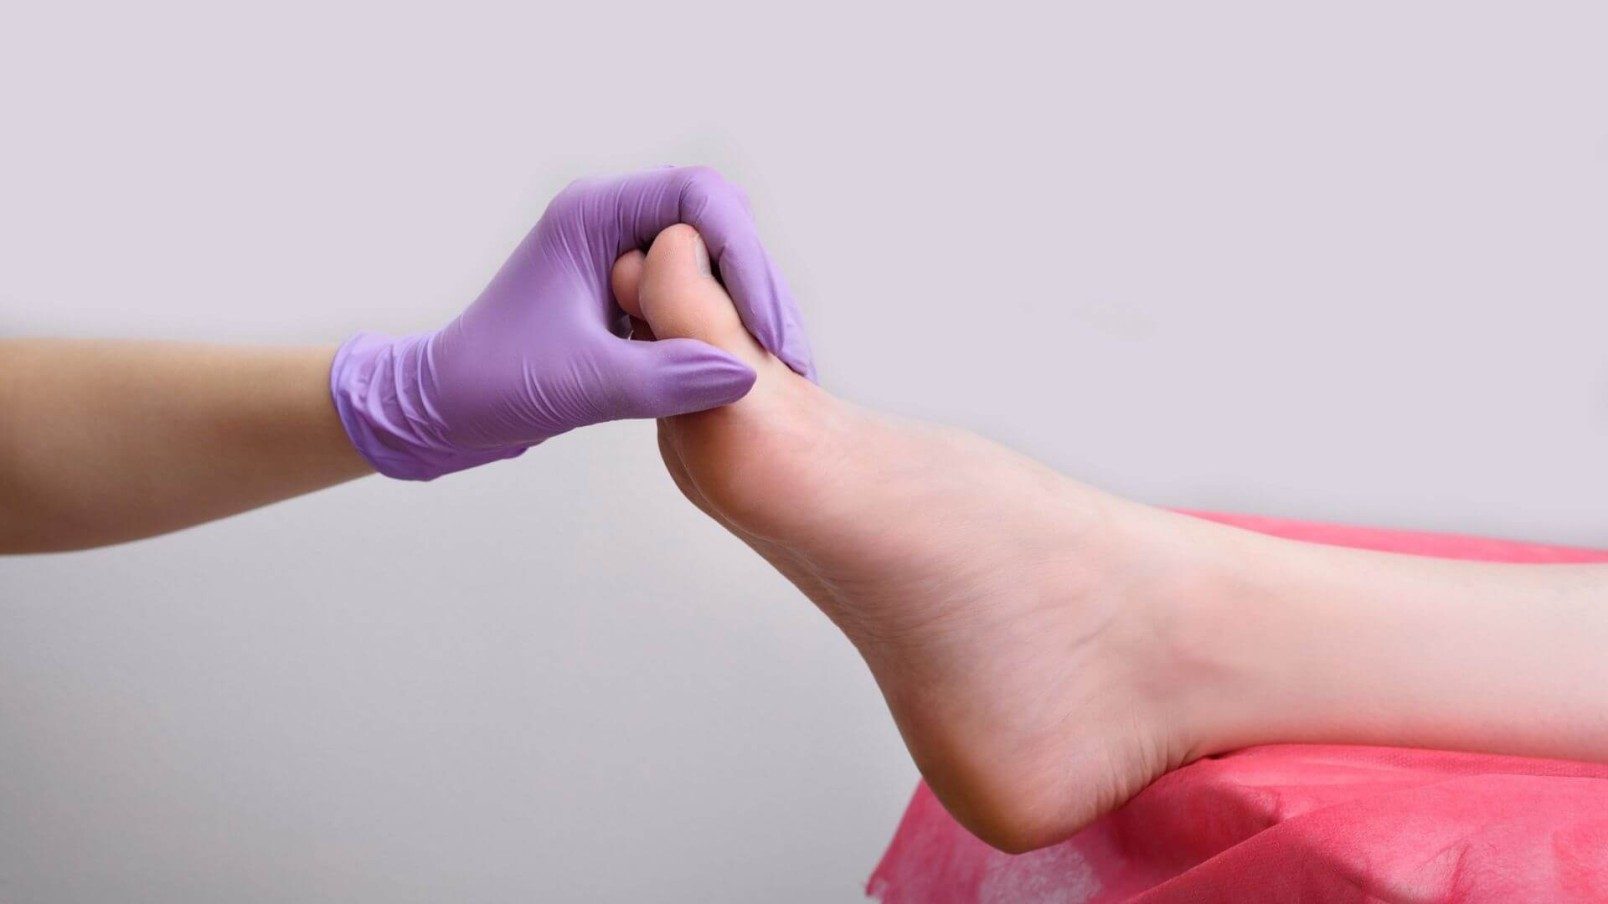 A side view of a hand in a purple glove holding a foot 